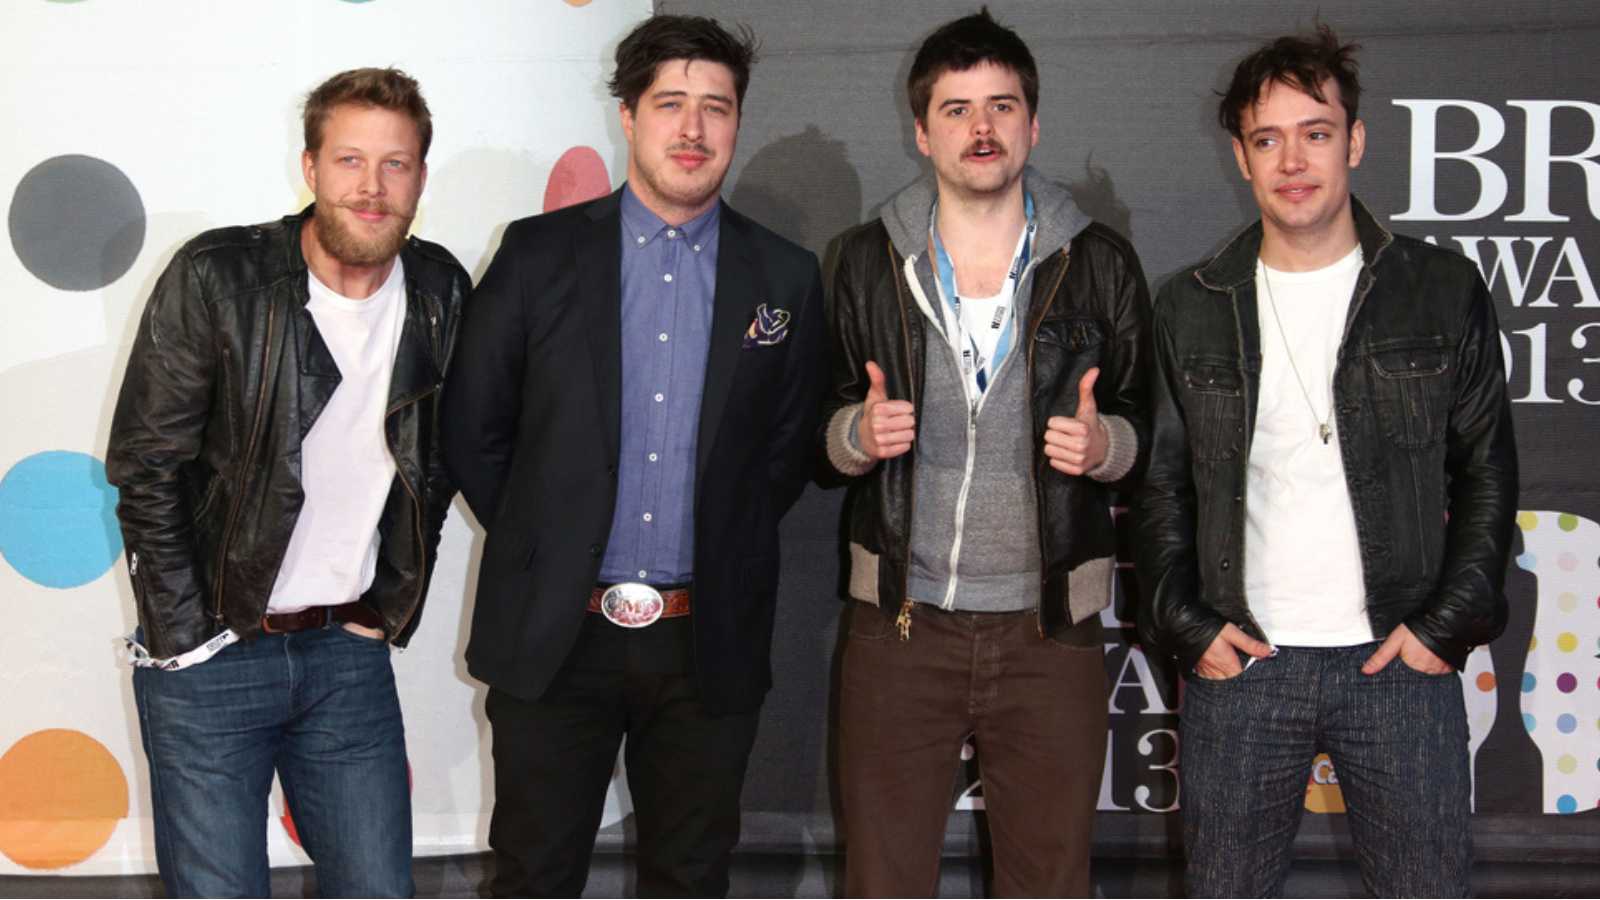 Mumford & Sons arriving for the Brit Awards 2013 at the O2 Arena, Greenwich, London. 20/02/2013 Picture by: Henry Harris